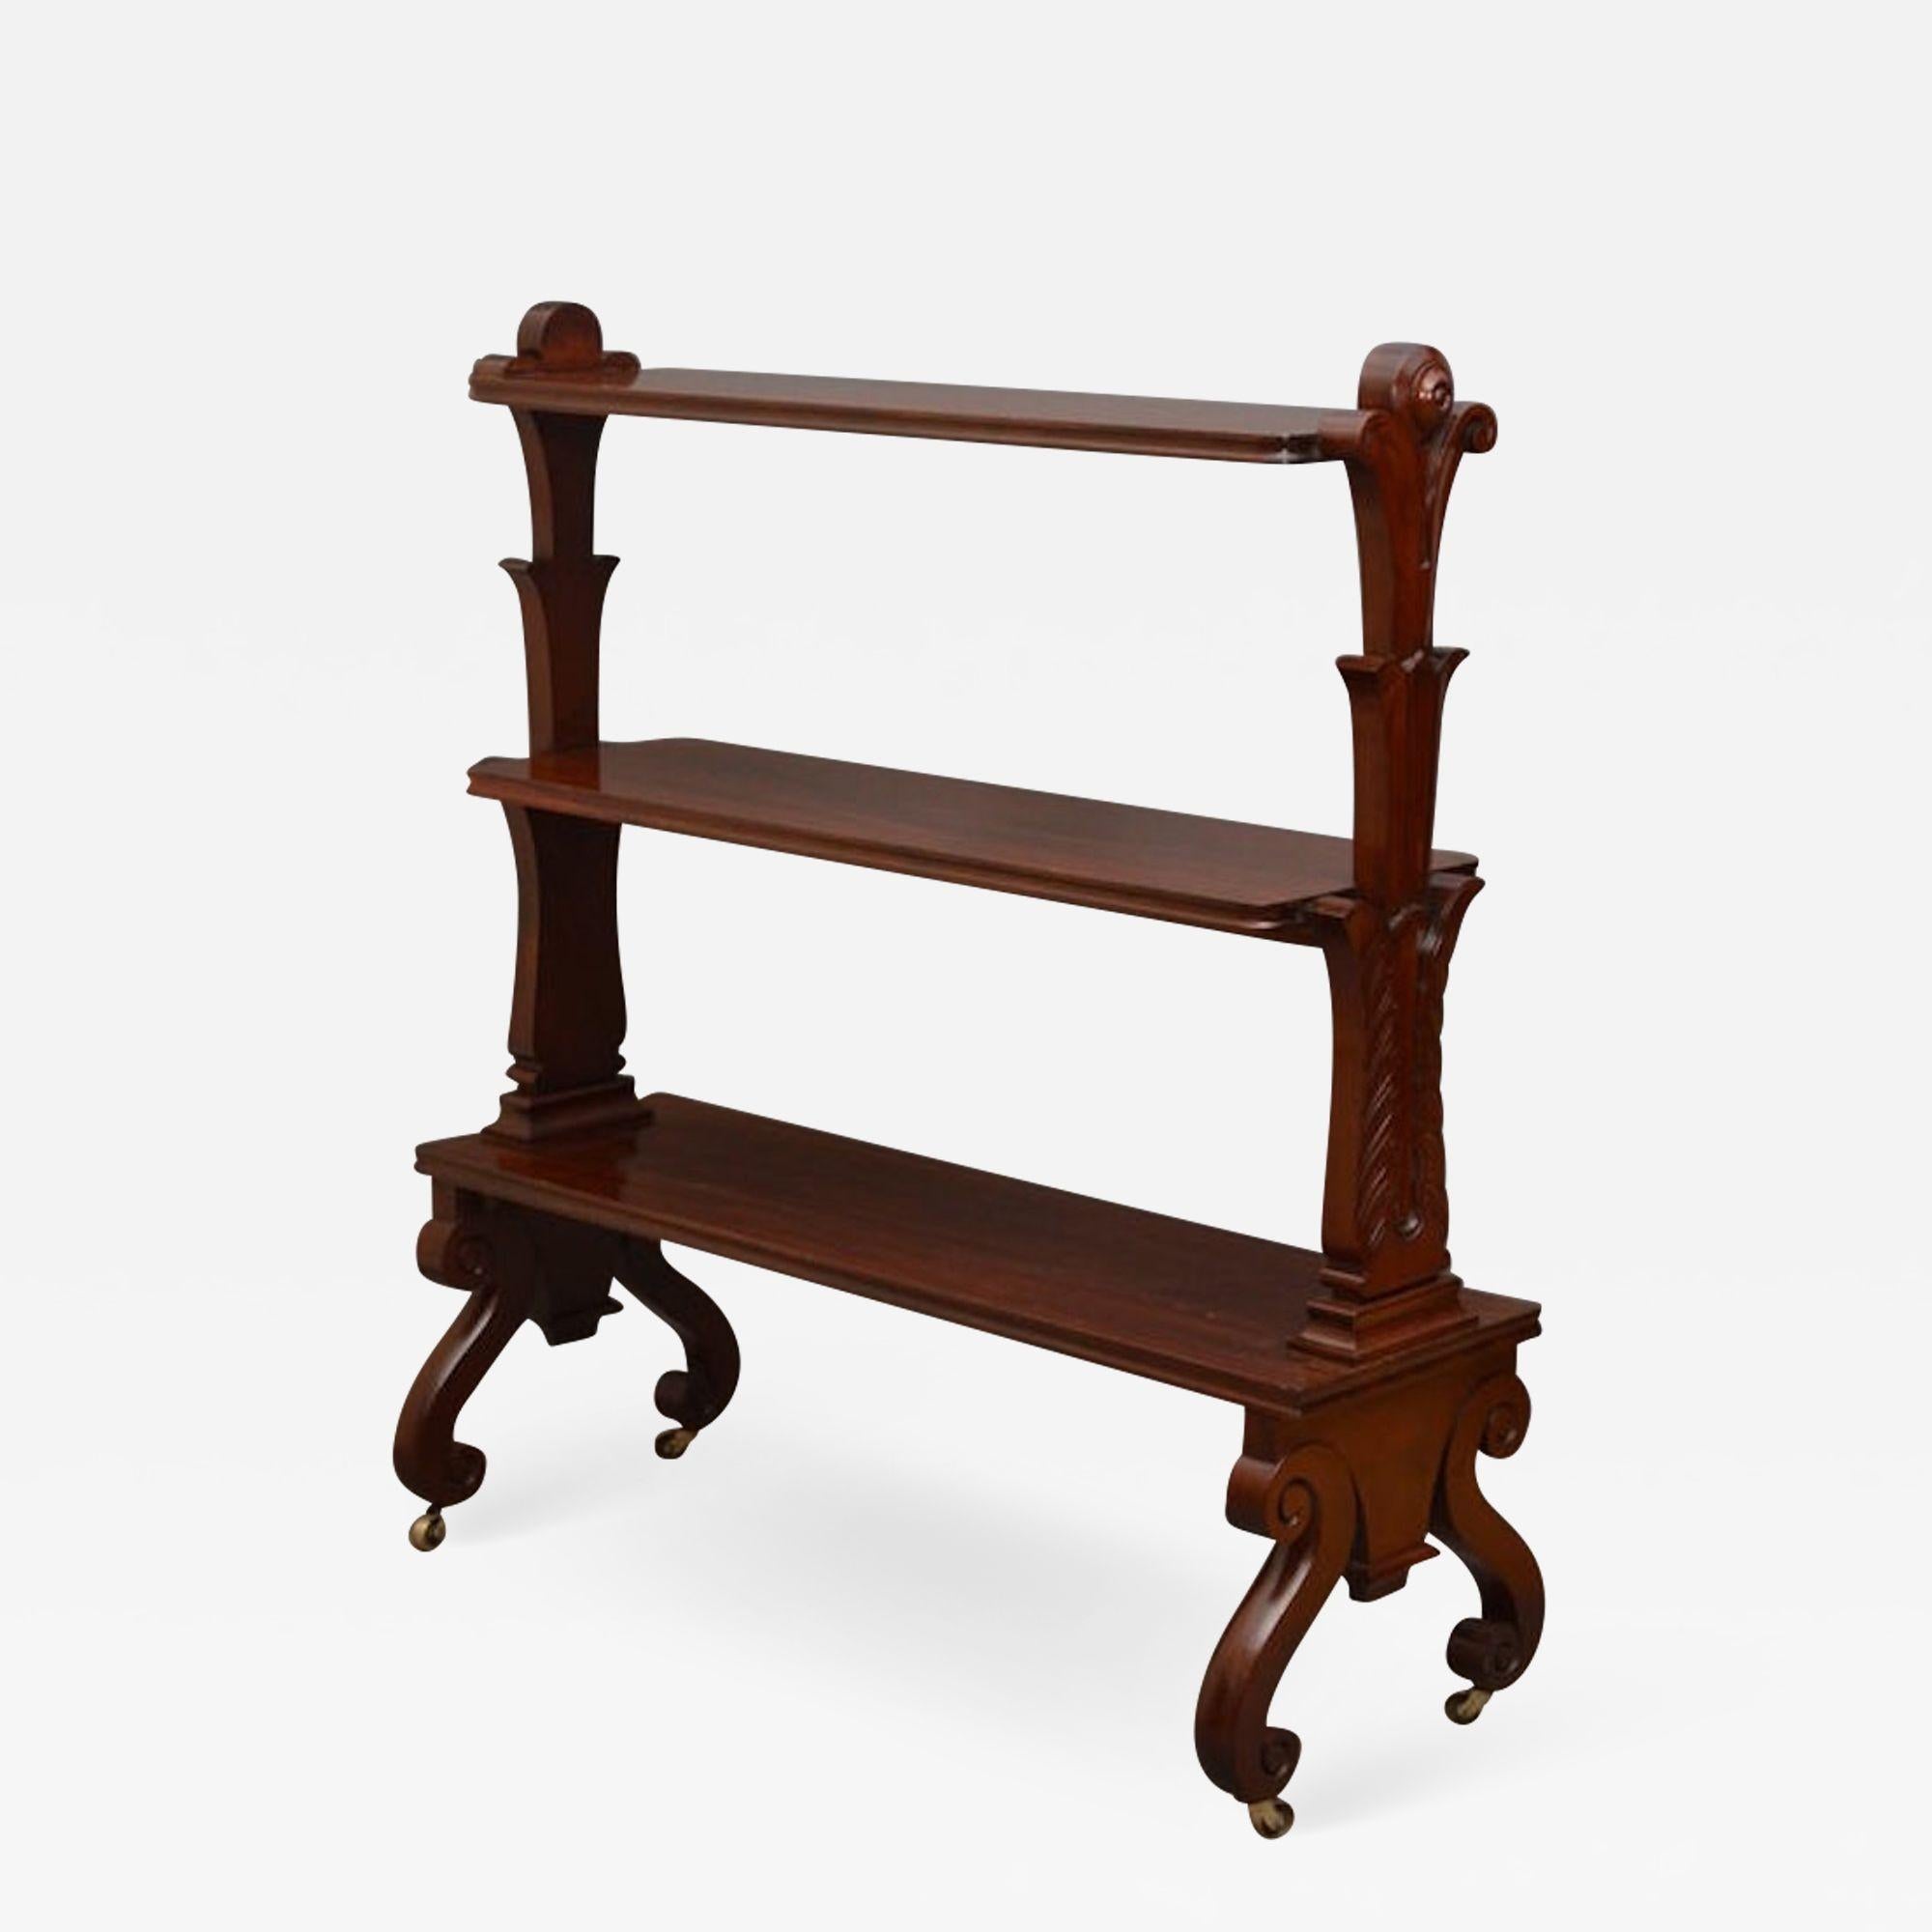 Sn2739 Excellent quality, William IV, mahogany freestanding whatnot, having 3 open tiers with moulded edges, shaped end supports carved with scrolls and applied with draught turned roundels, all standing on scroll legs in original castors. This